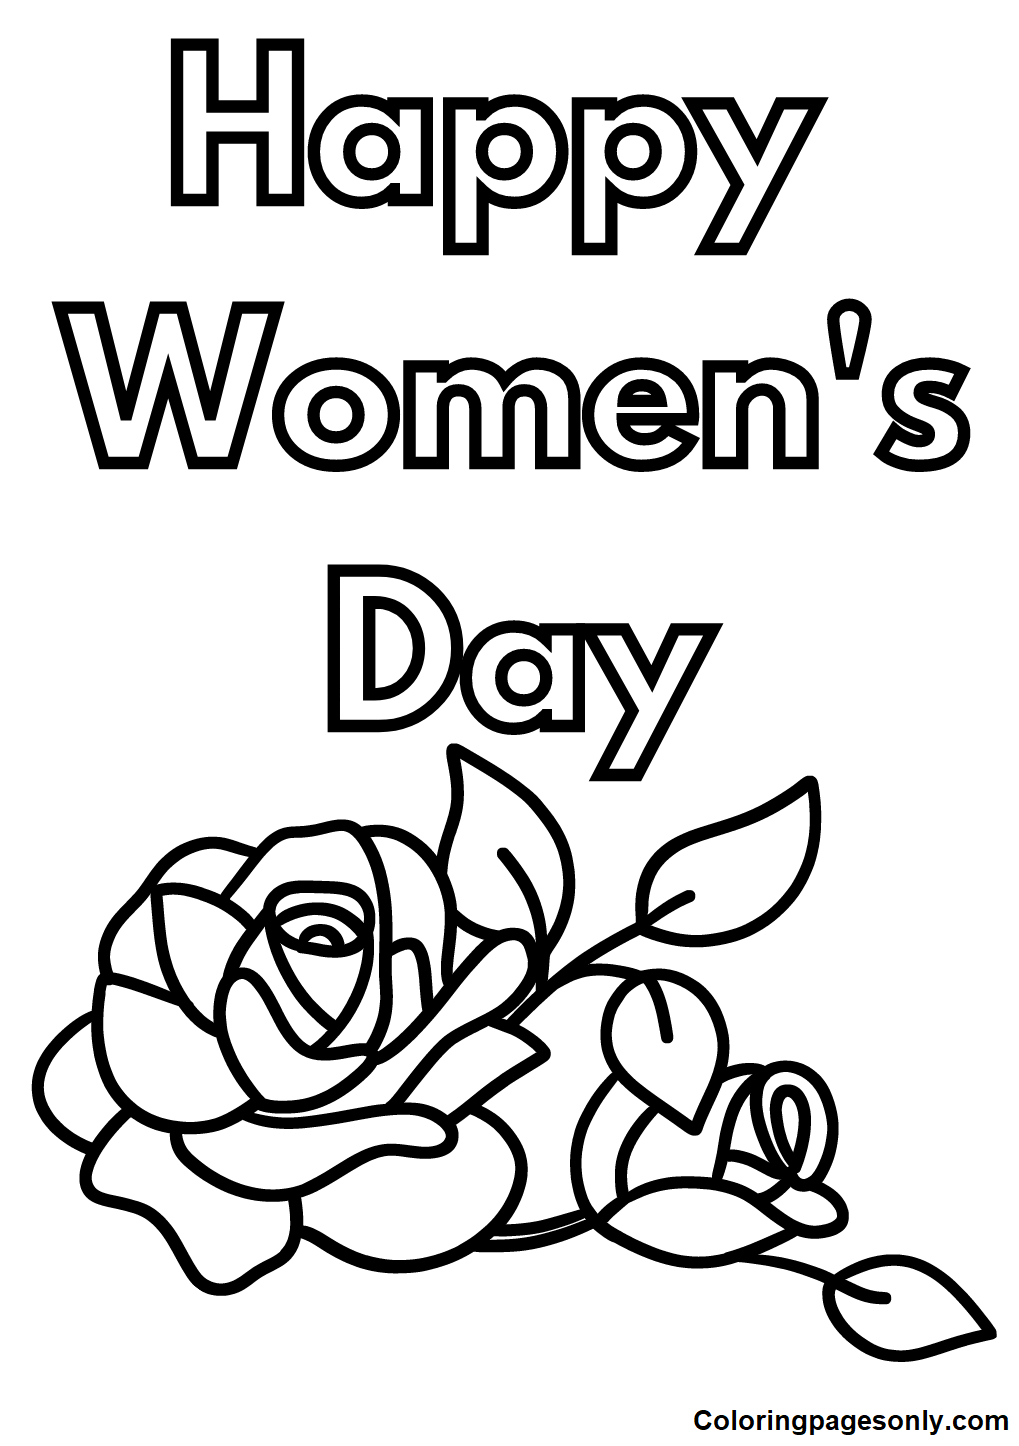 Happy Women’s Day Picture Coloring Pages